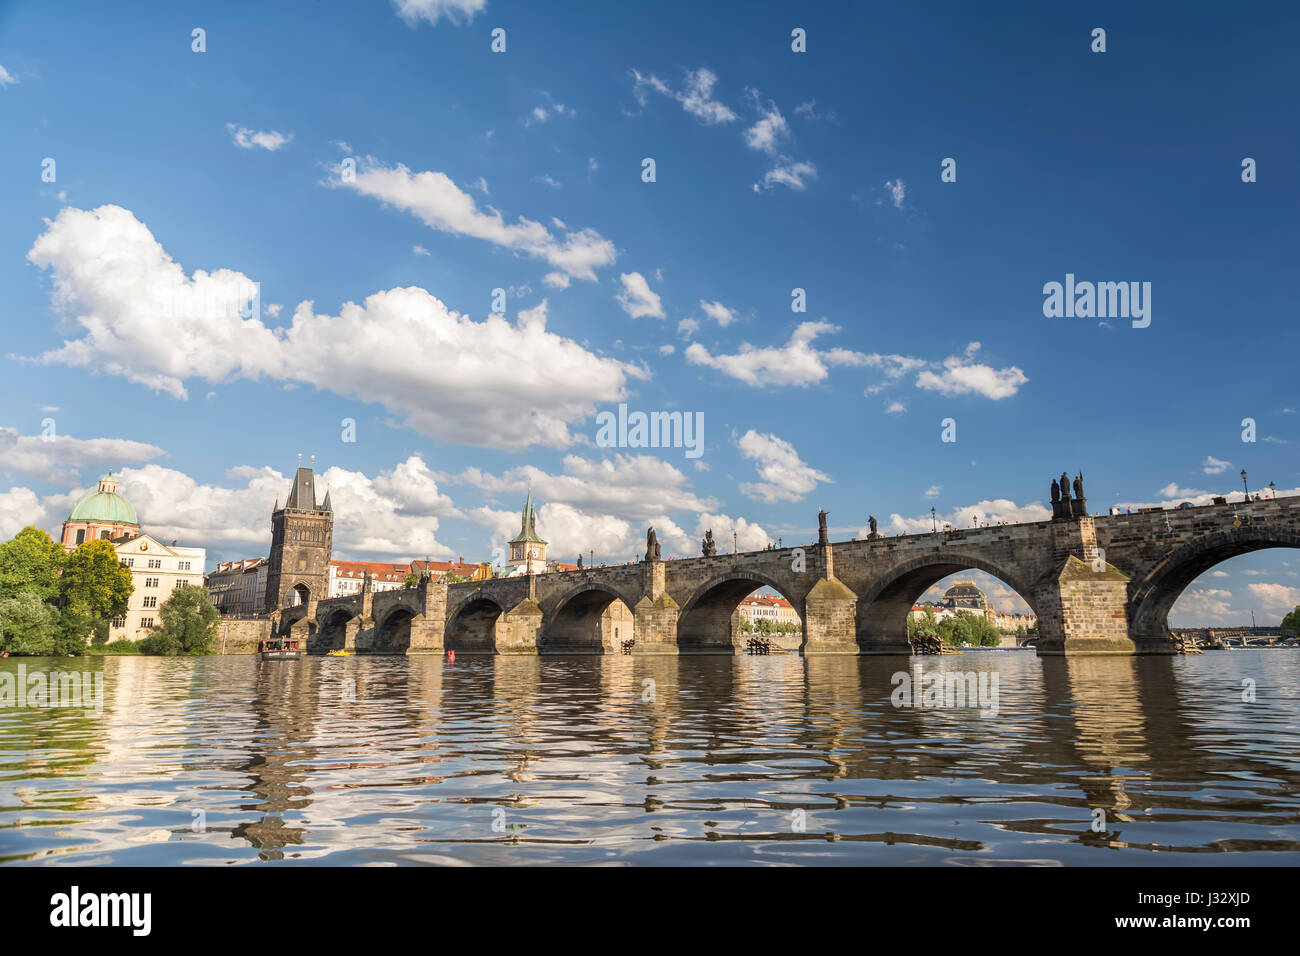 PRAGUE, CZECH REPUBLIC, JULY 5, 2016: Wide angle view of Charles Bridge and Old Town Bridge Tower, famous landmarks with gothic architecture Stock Photo